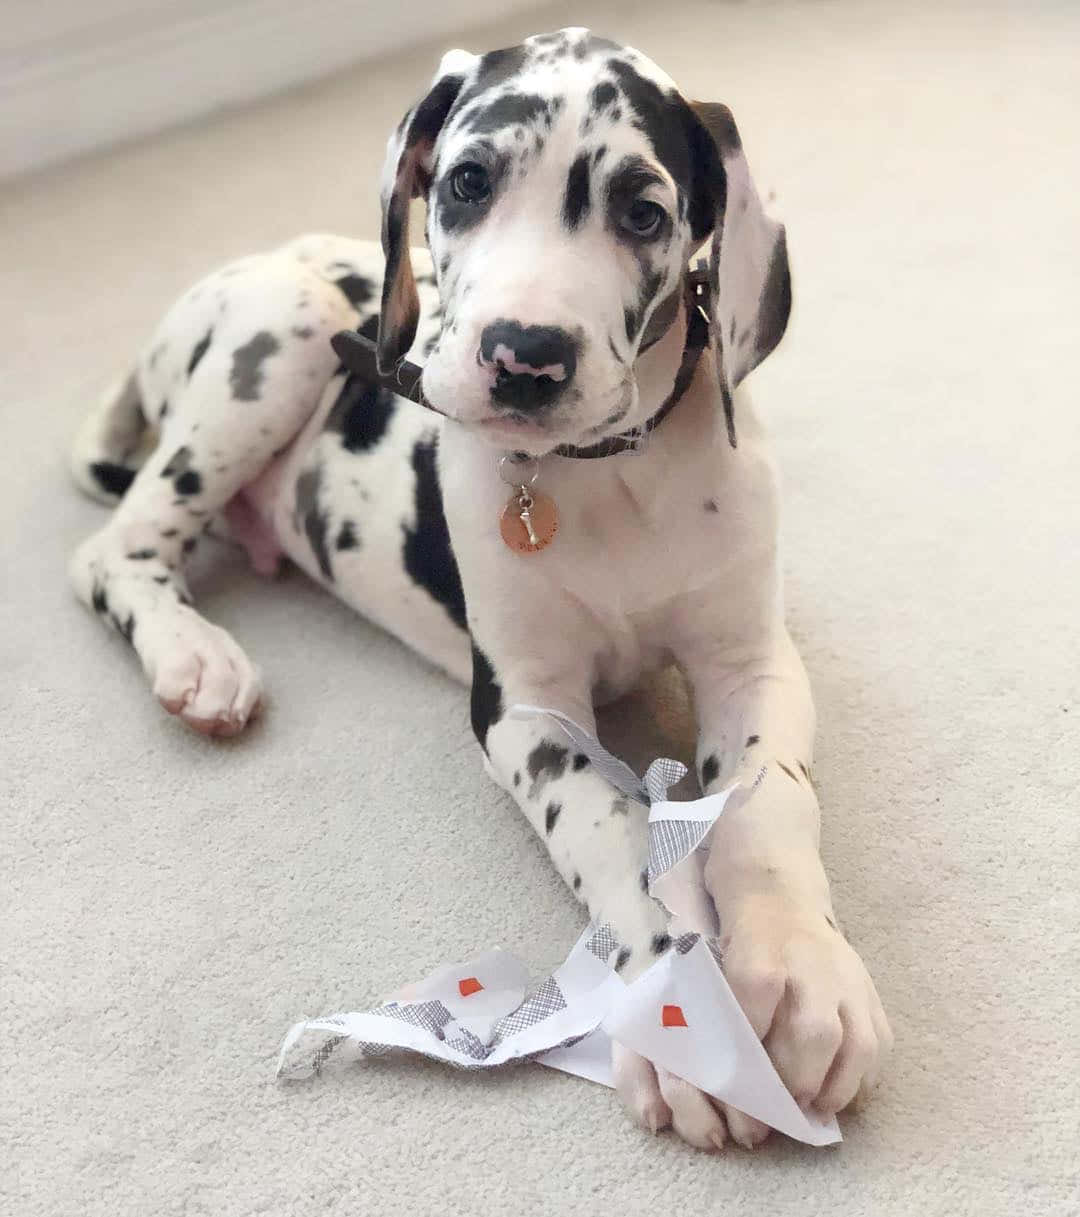 A Dalmatian Puppy Laying On The Floor With A Piece Of Paper